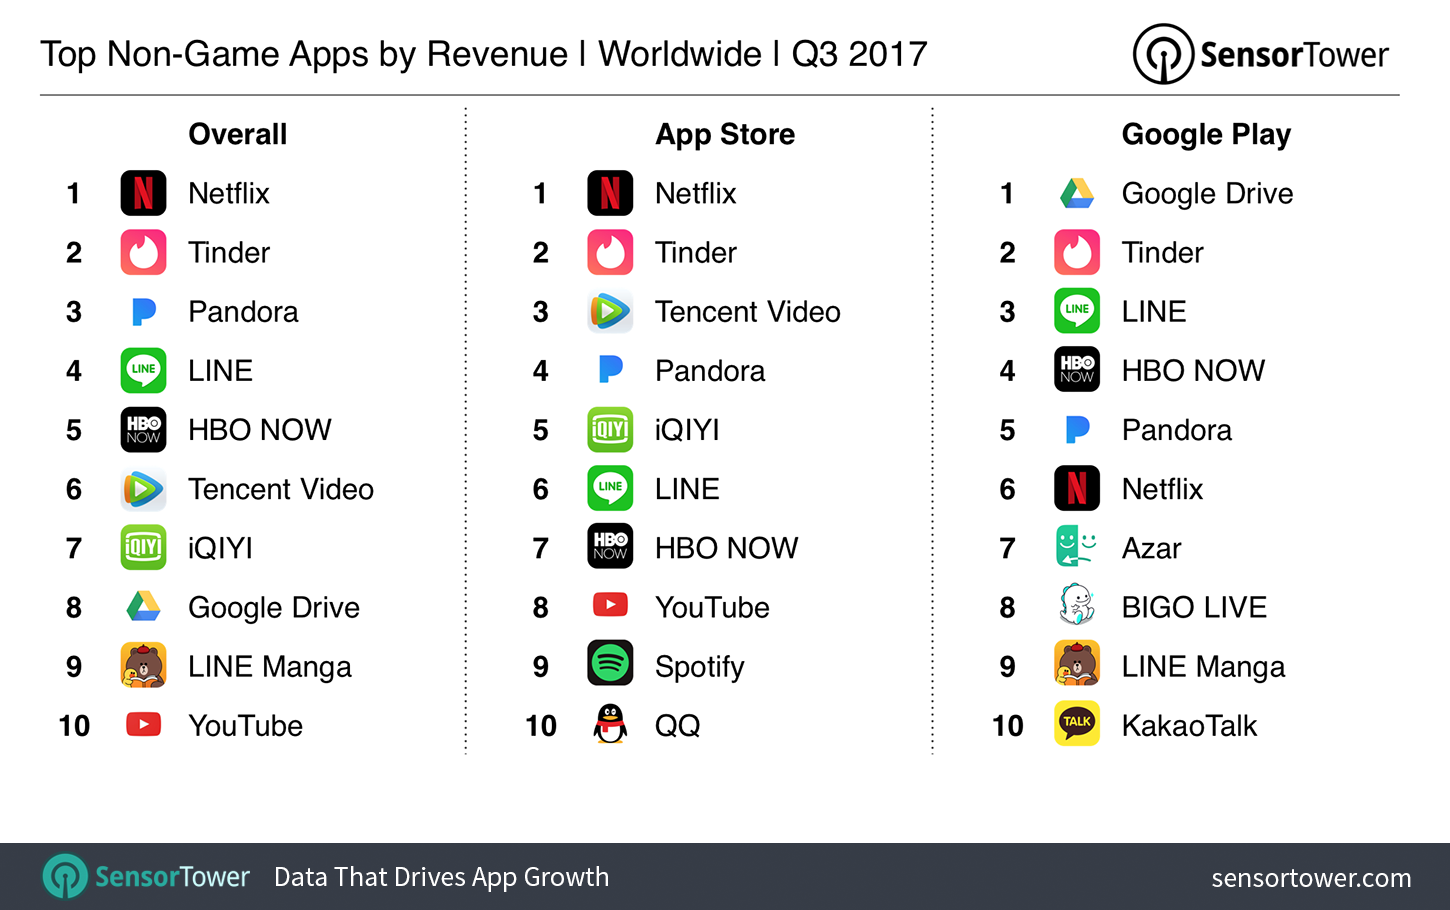 Q3 2017's Top Mobile Apps by Worldwide Revenue